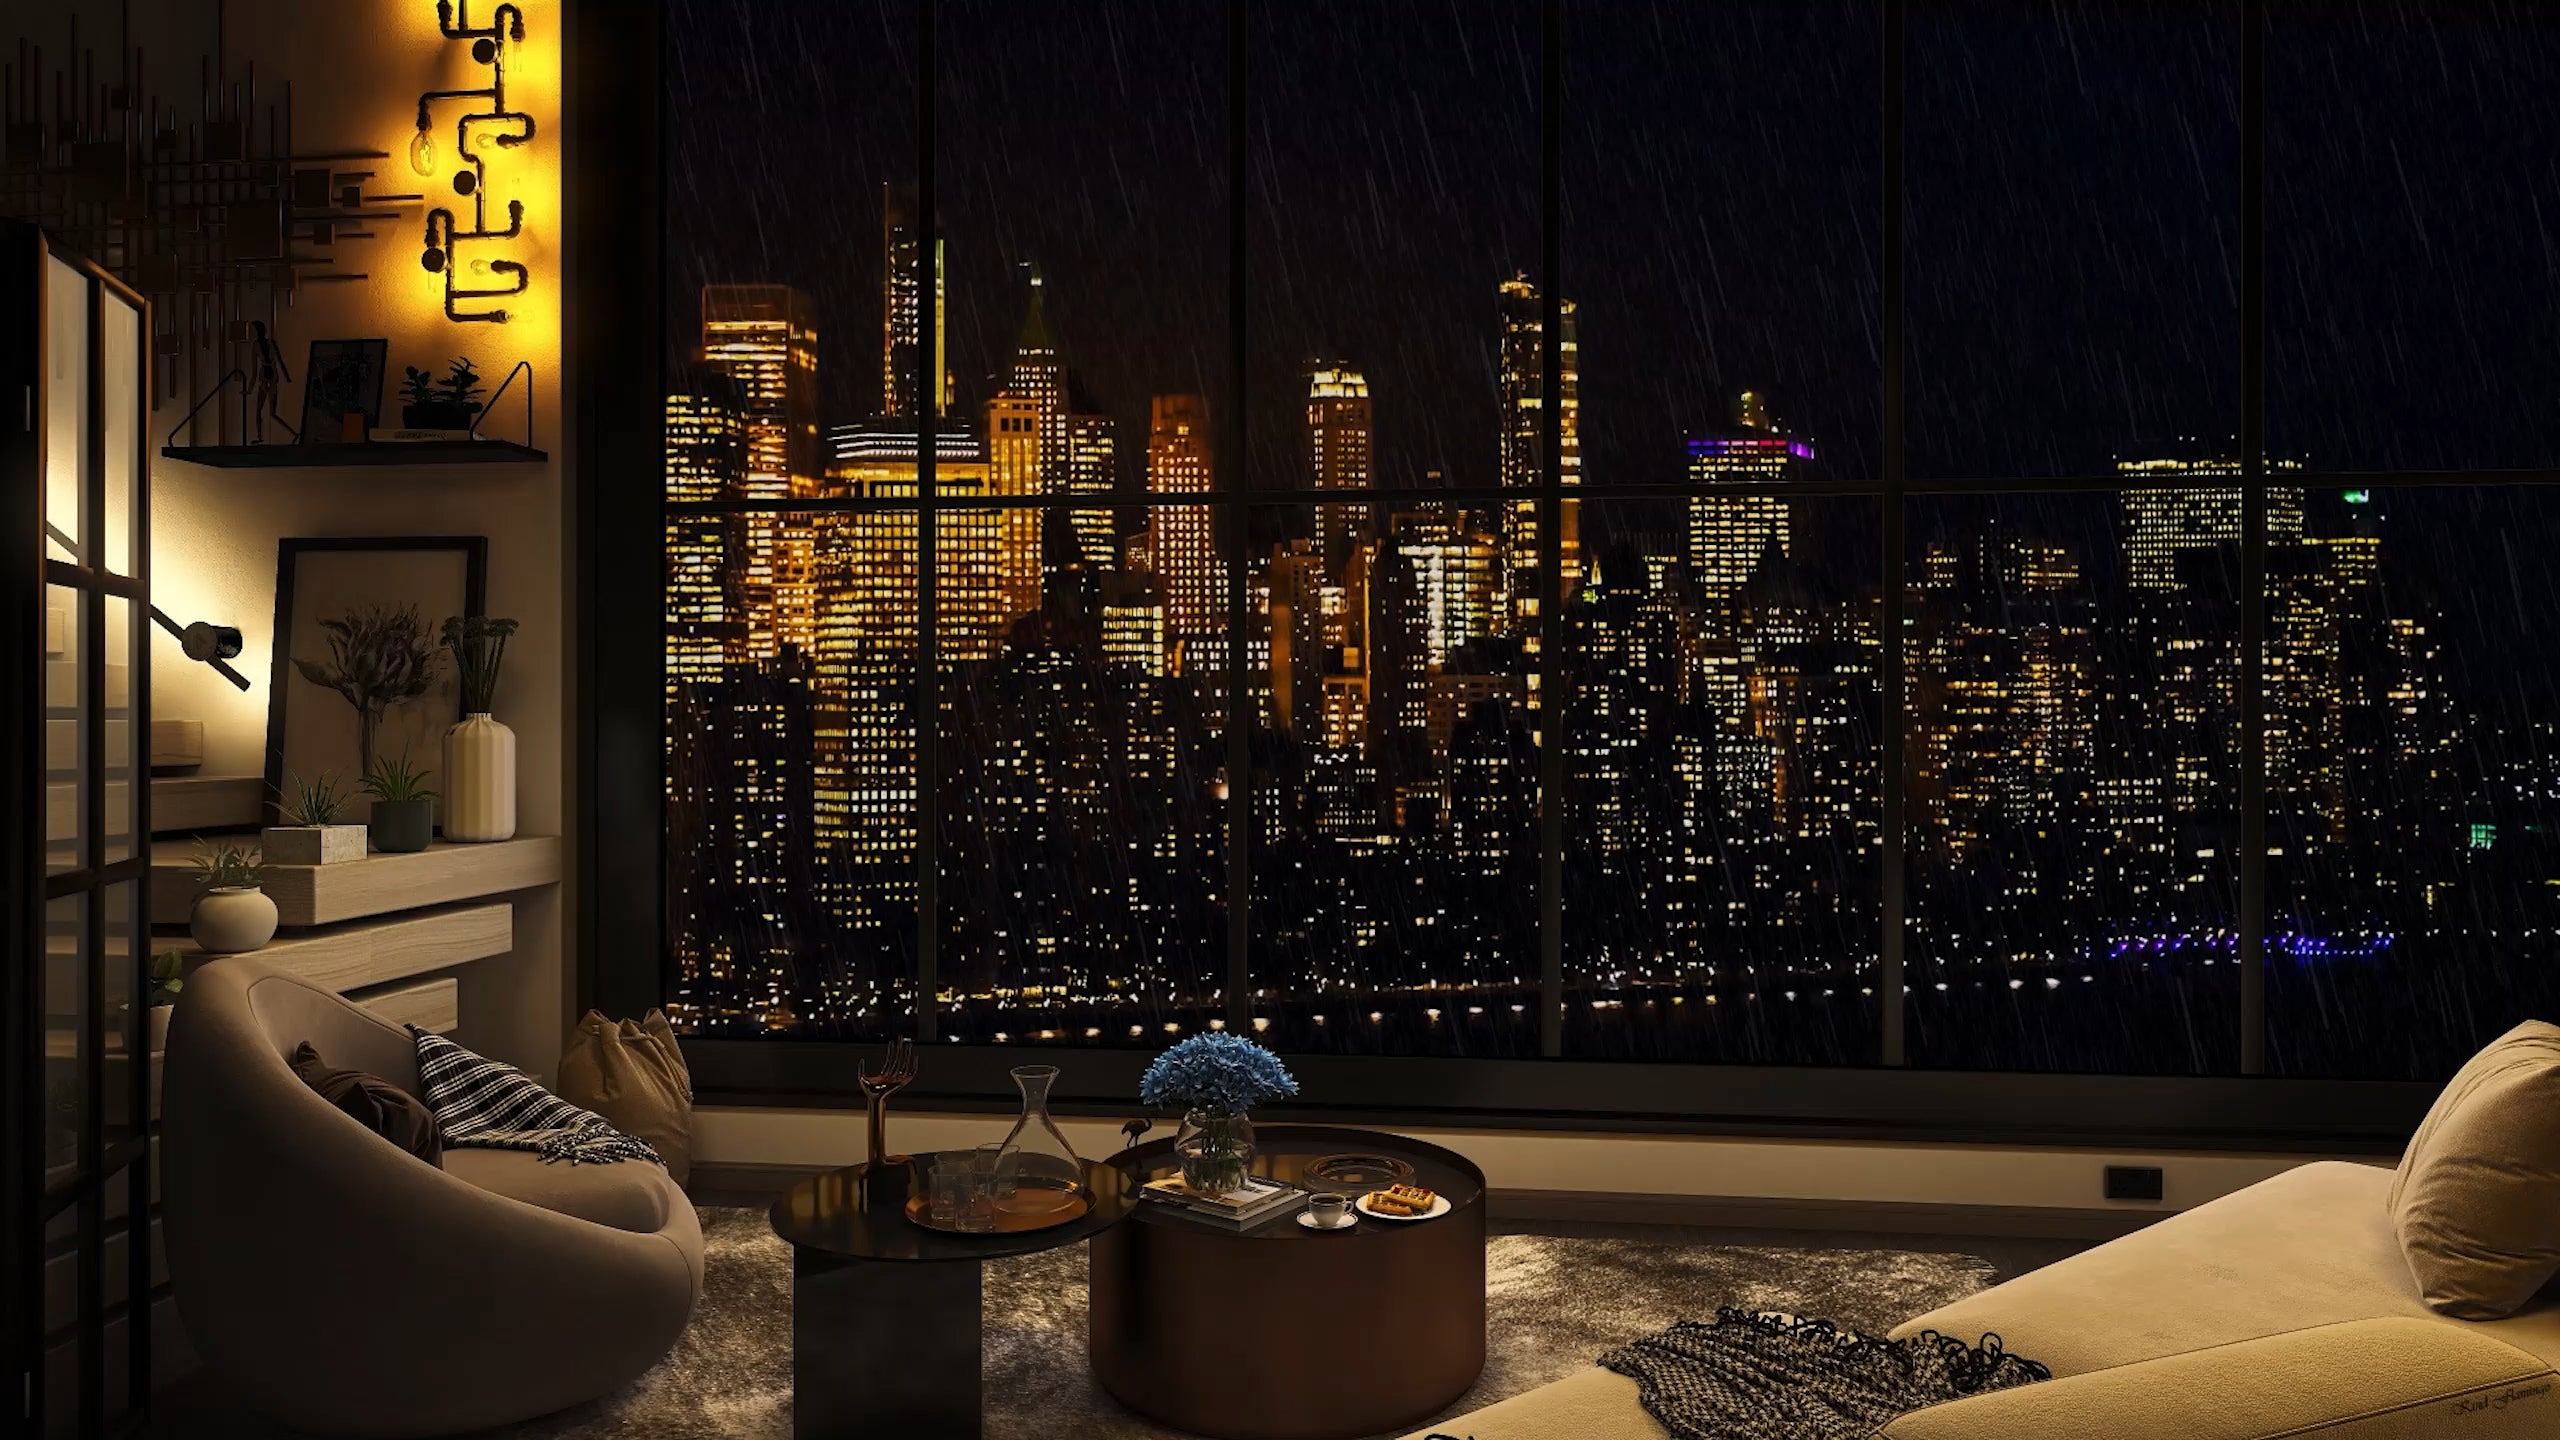 A Rainy Night in NYC Cozy Apartment. for My Youtube Ambience Channel. [1920x1080]